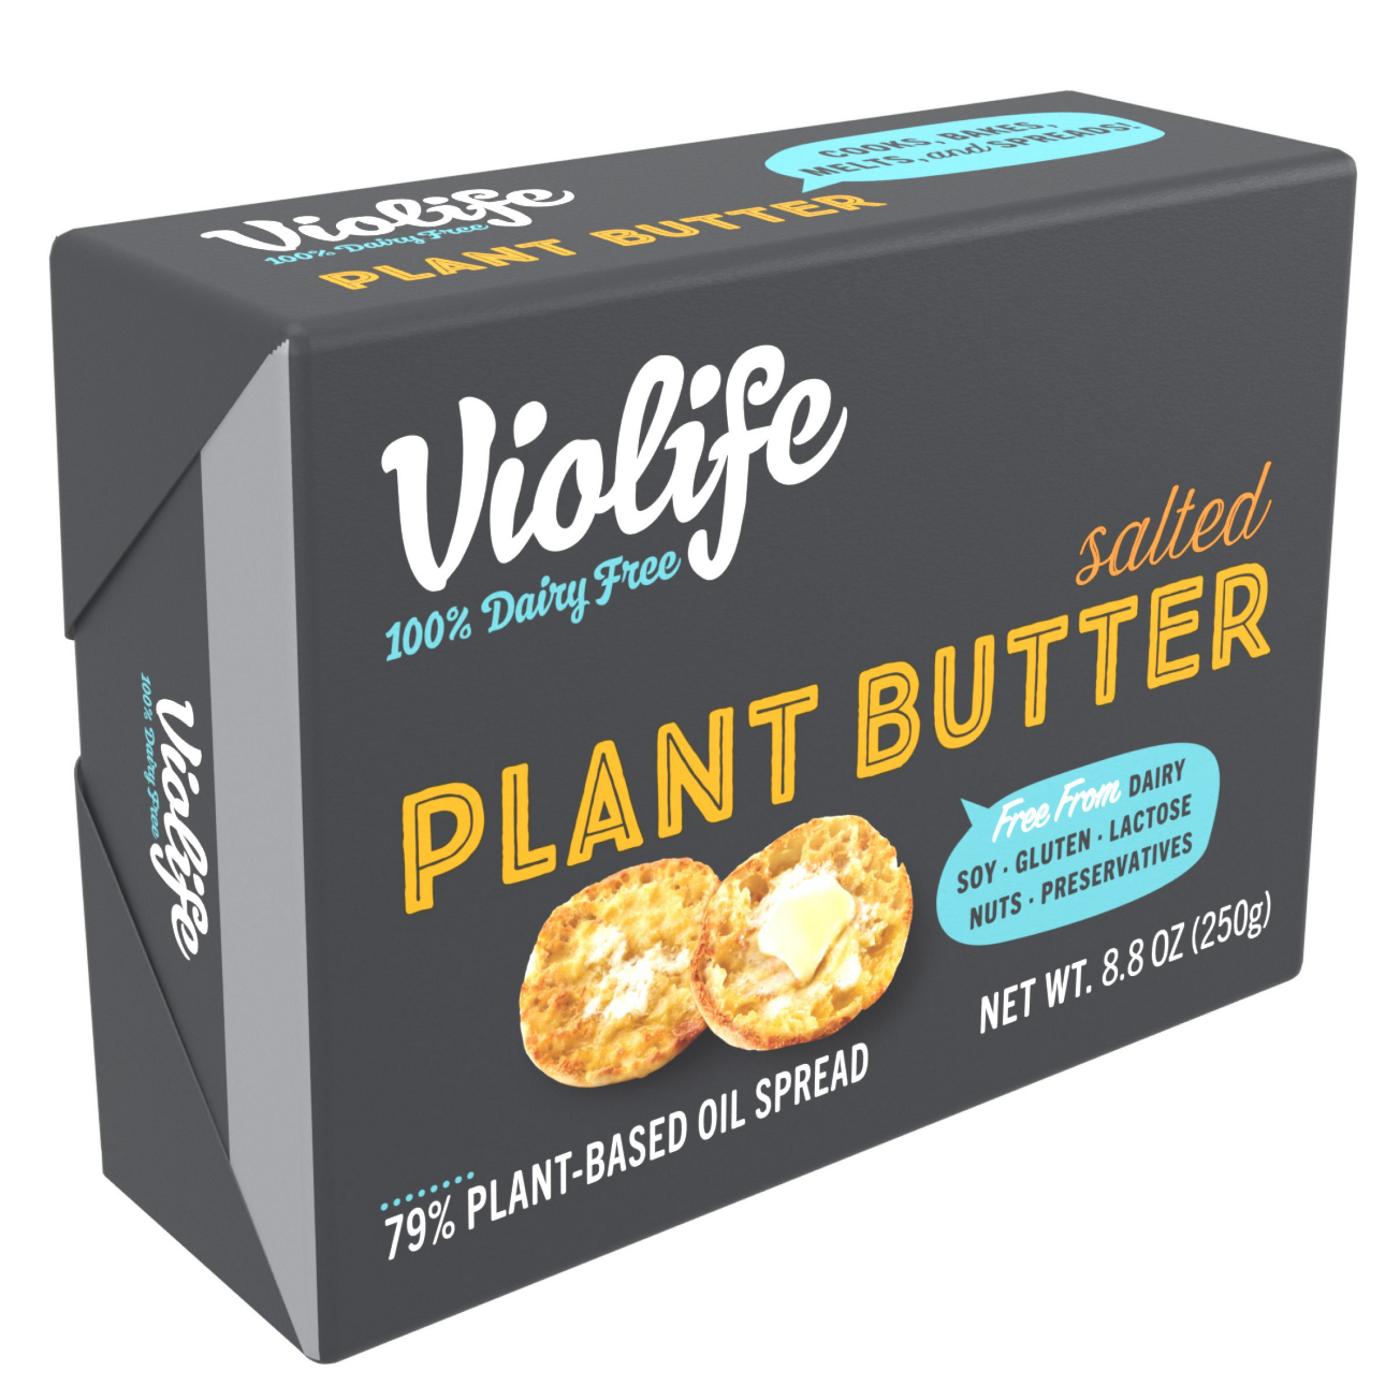 Violife Plant Butter Salted Dairy-Free Vegan; image 2 of 10